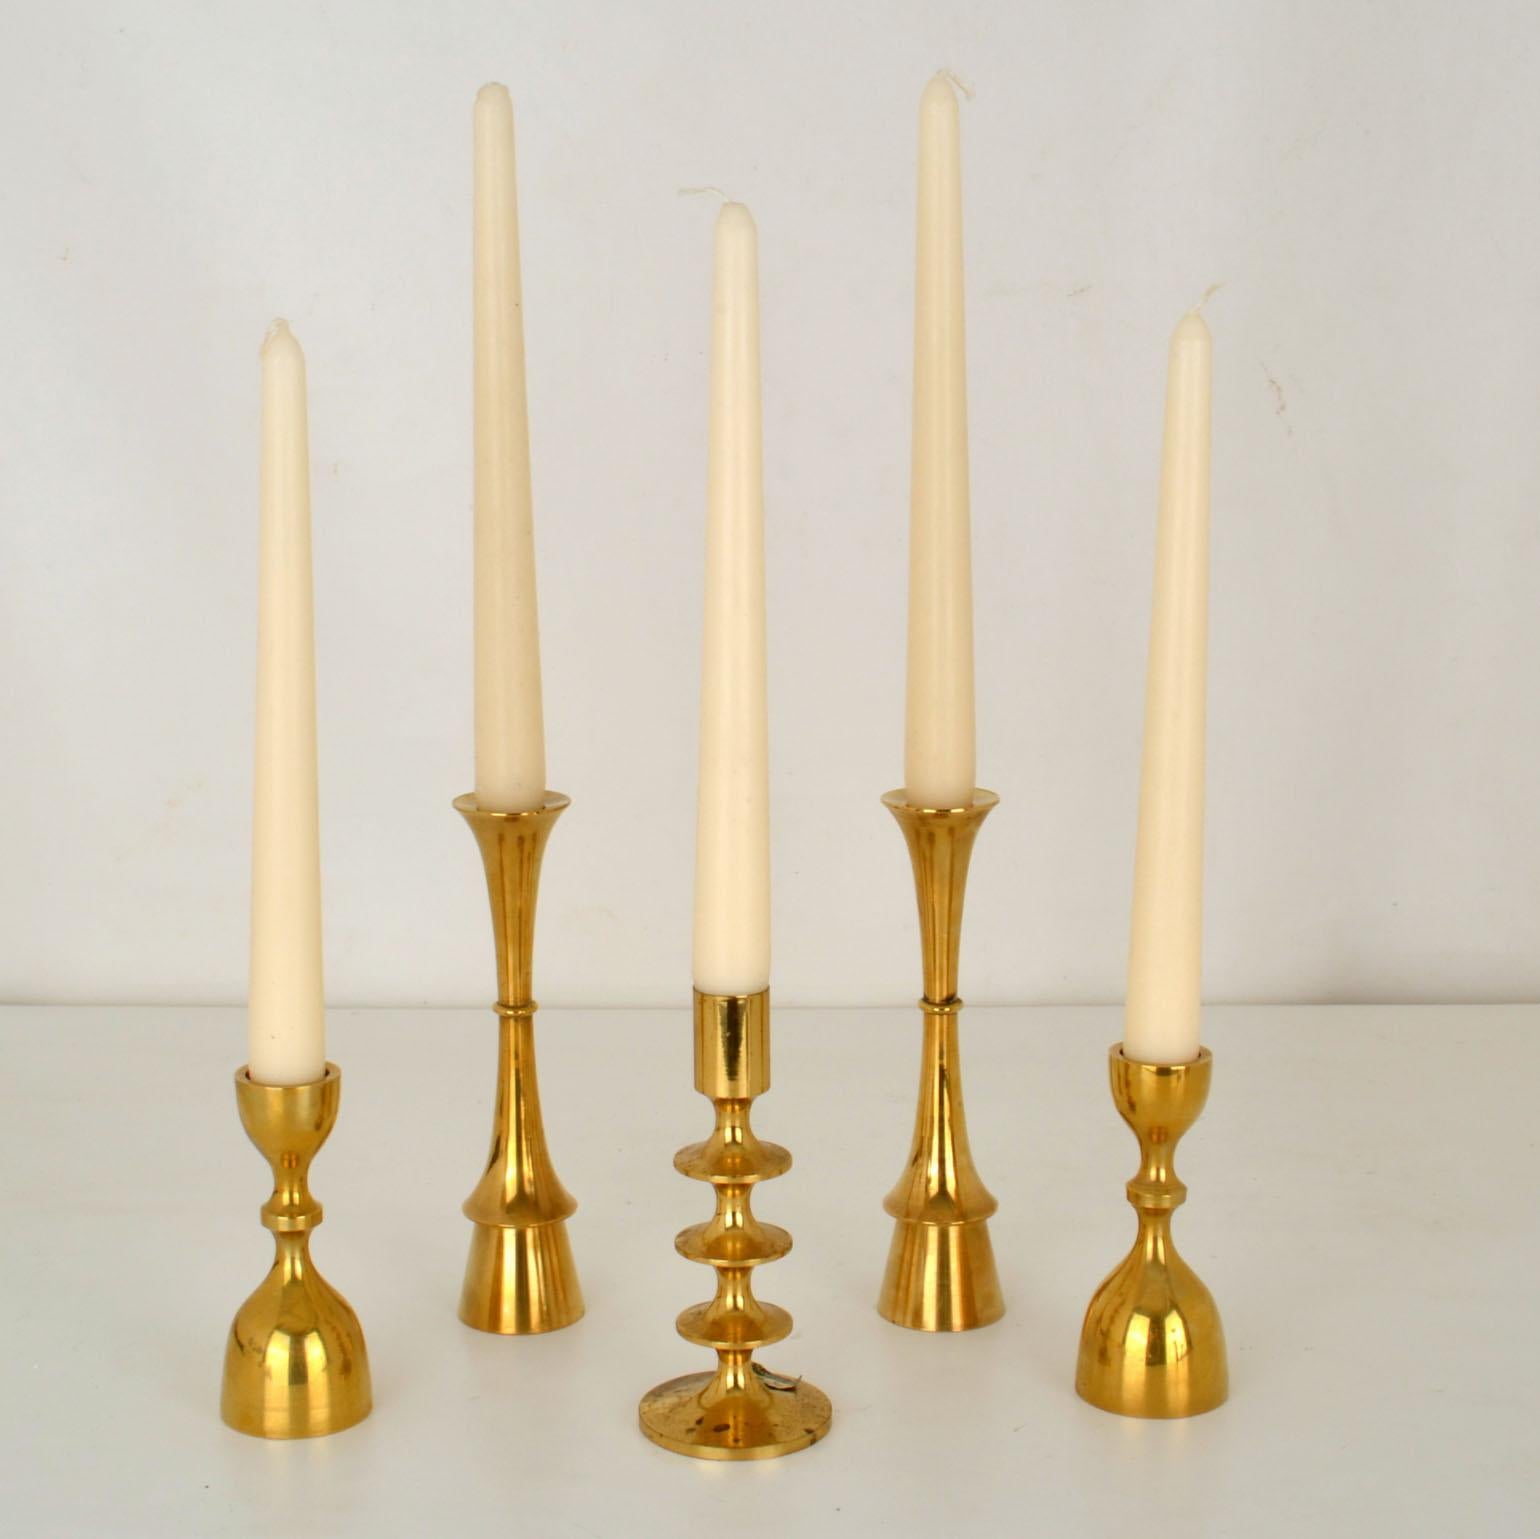 Five solid brass Mid-Century Modern candle holders, 2 pairs and a single for regular candles. The tall one is by Hyslop. The middle one is labelled SKS Design
Measures: Heights: 18-16-11 cm 
Diameter: 4-6-4.5 cm.

 